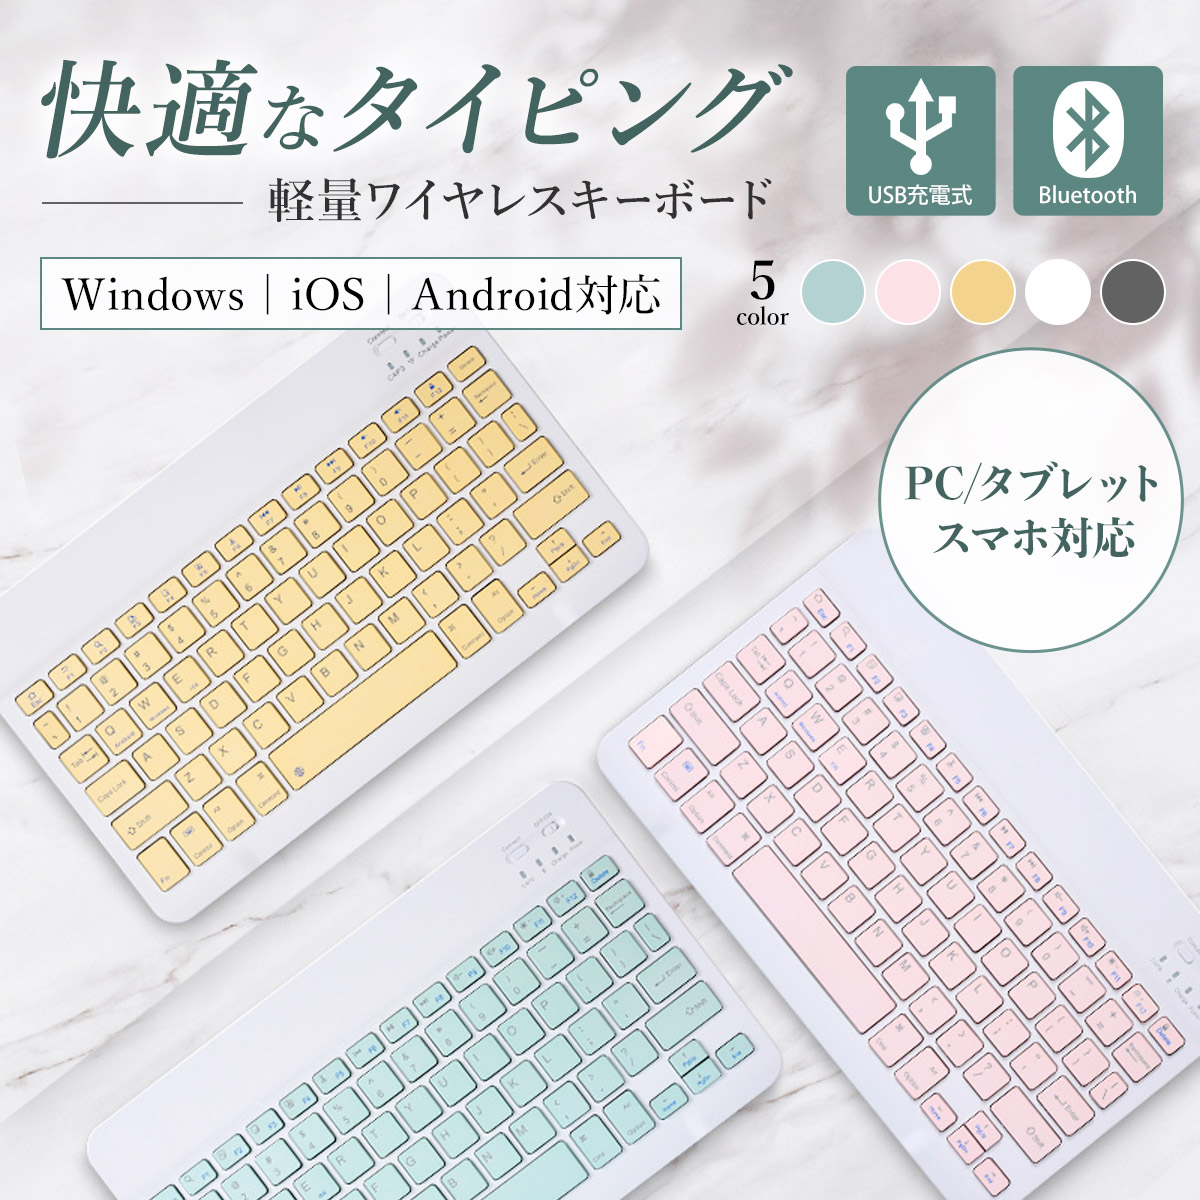  wireless key board bluetooth iPad USB rechargeable iPhone quiet sound tablet wireless thin type light weight 